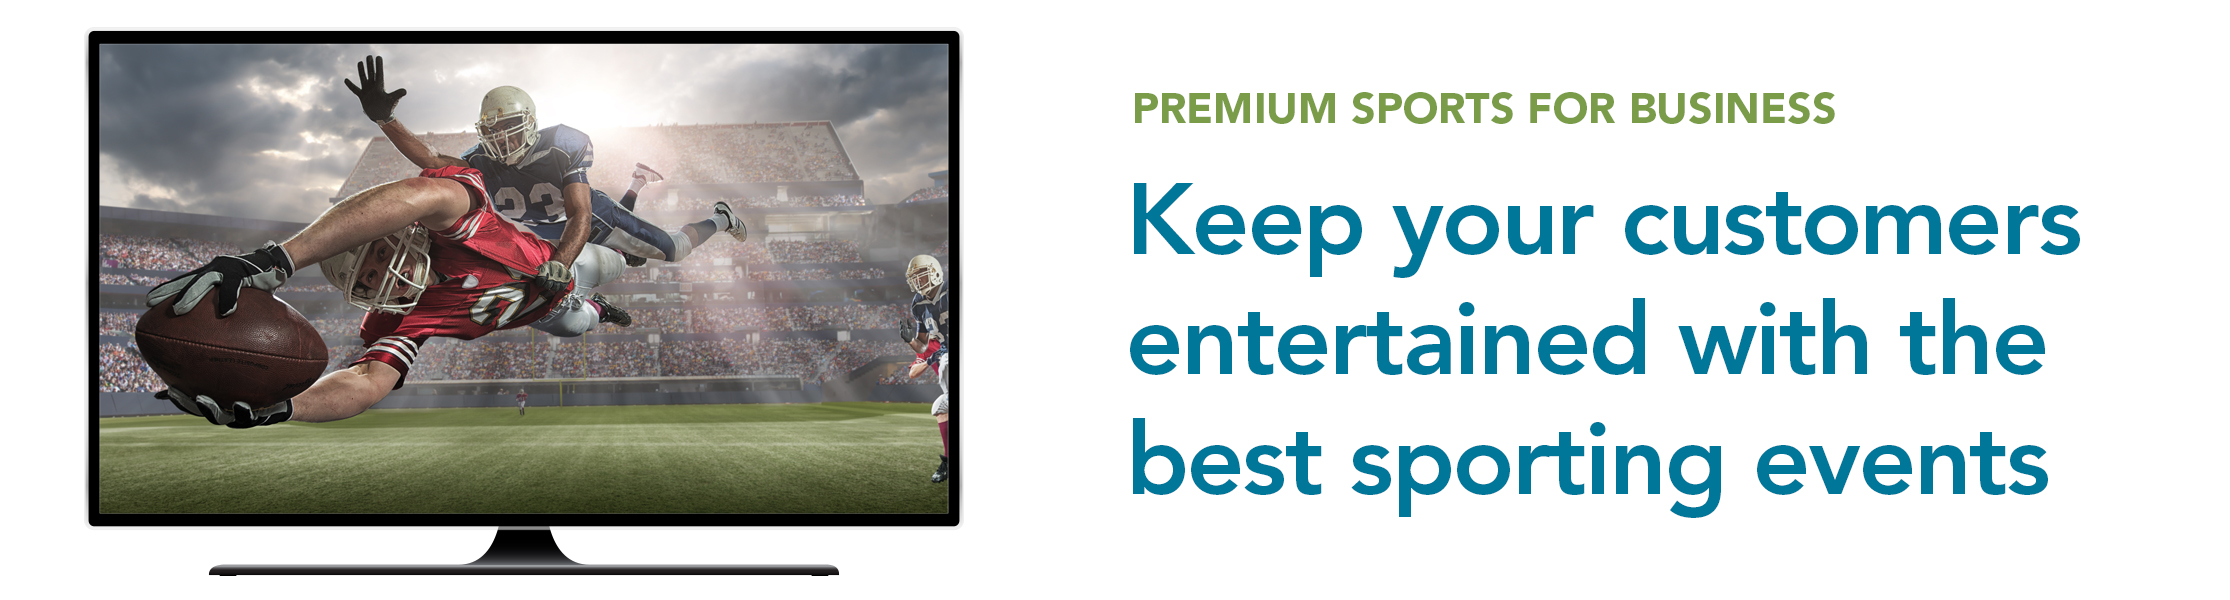 Keep your customers entertained with the best sporting events